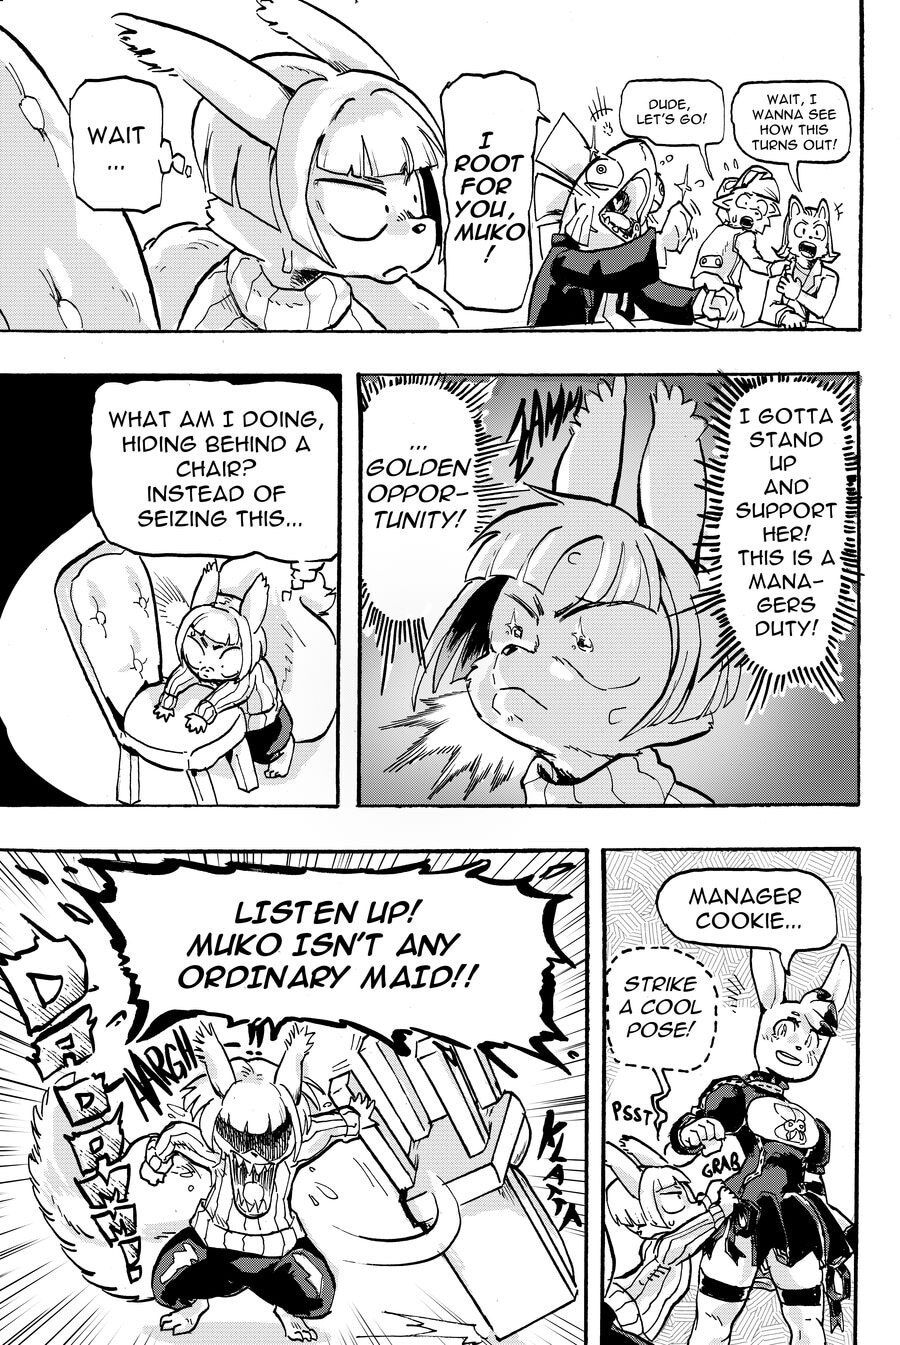 Furry Fight Chronicles 5 - Page 4